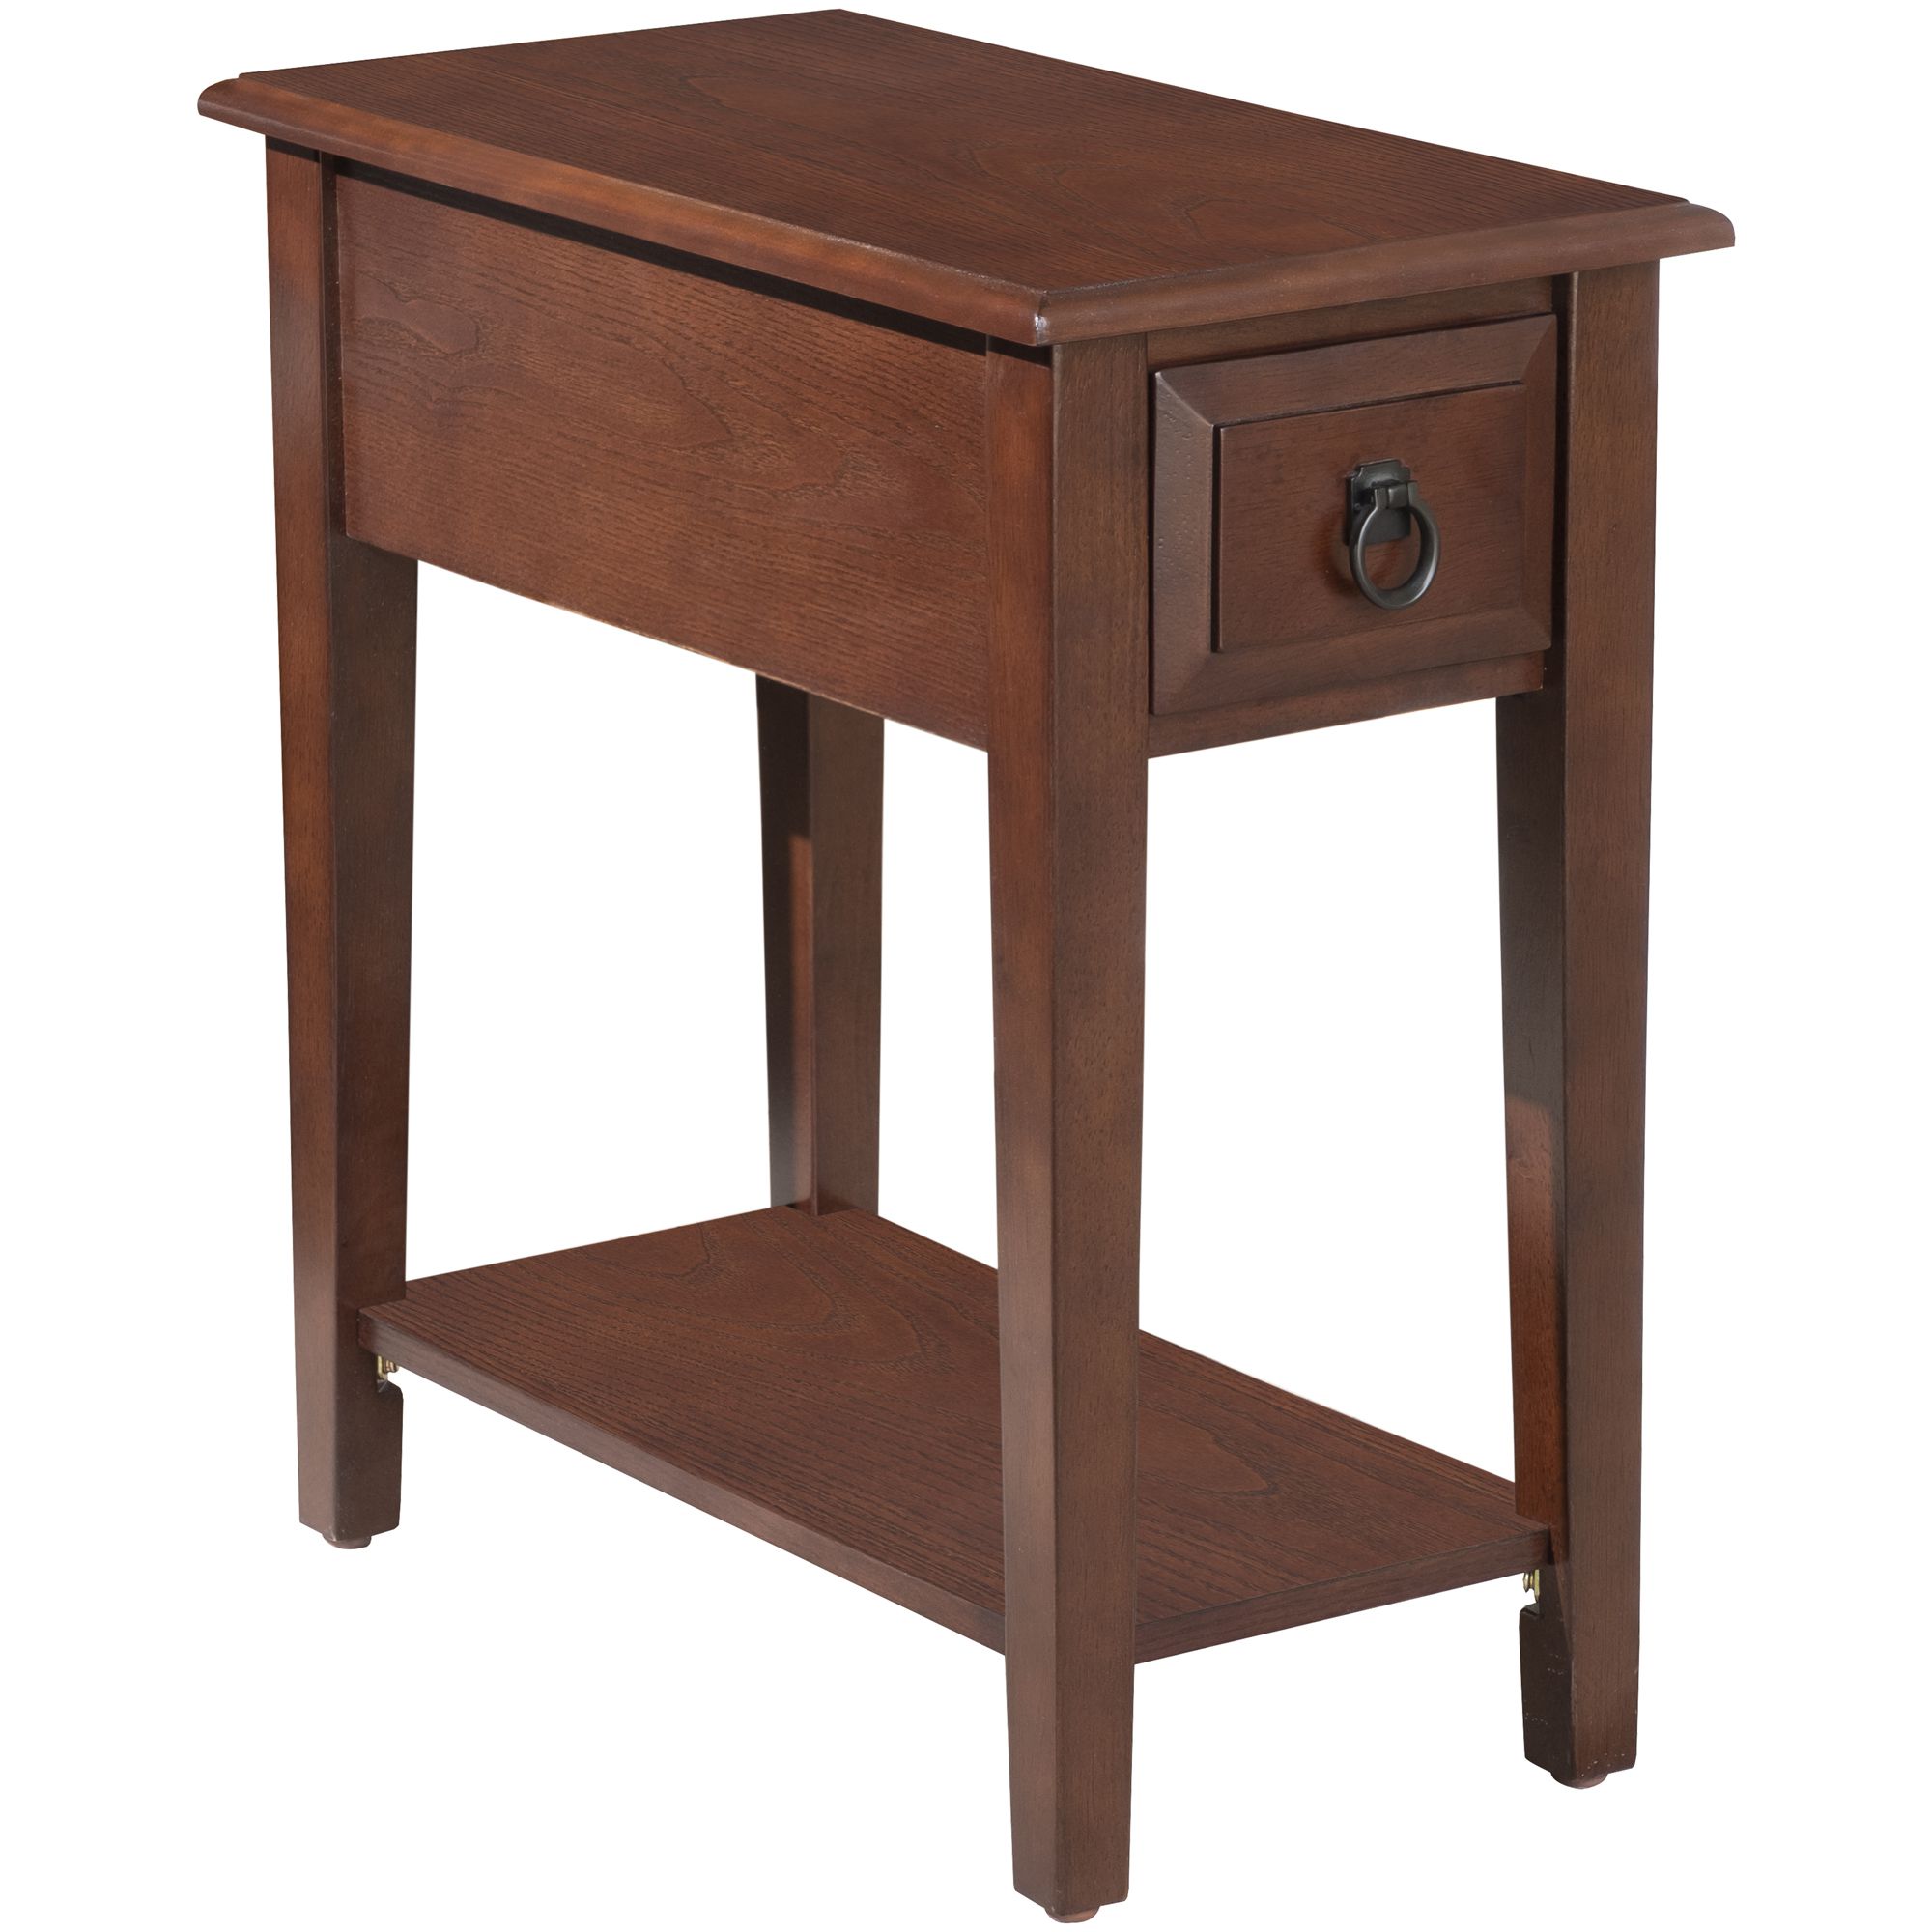 homcom modern tier acacia wood end table side desk with drawer accent dark coffee aosom round pine pottery barn display leaf hampton bay spring haven gold legs patio loveseat